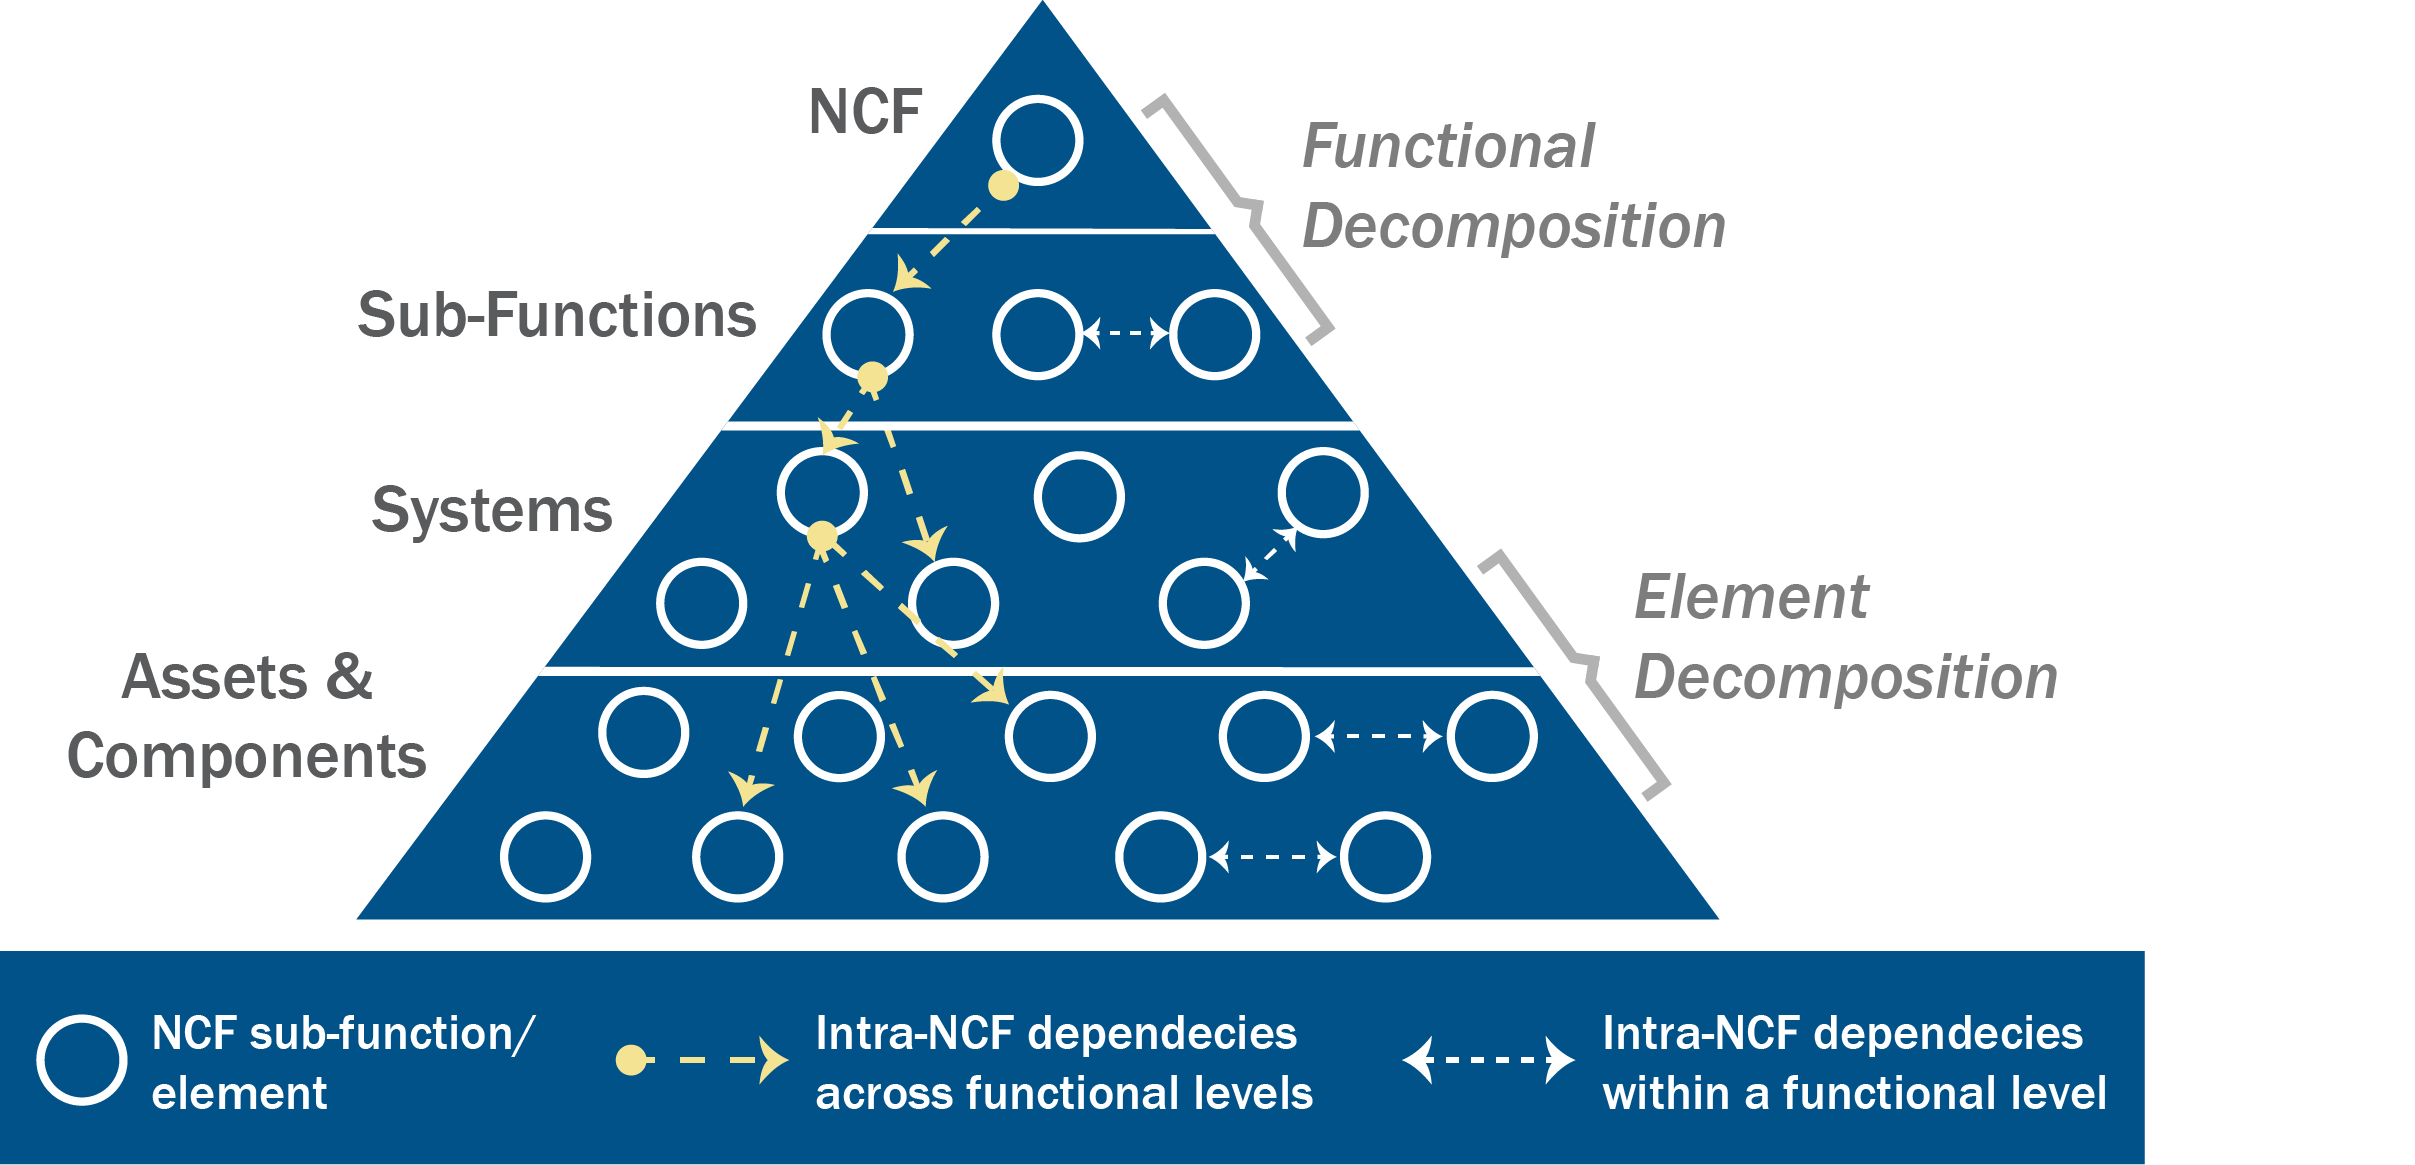 The figure below illustrates how an NCF can be decomposed to illuminate a more granular understanding of its provisioning.